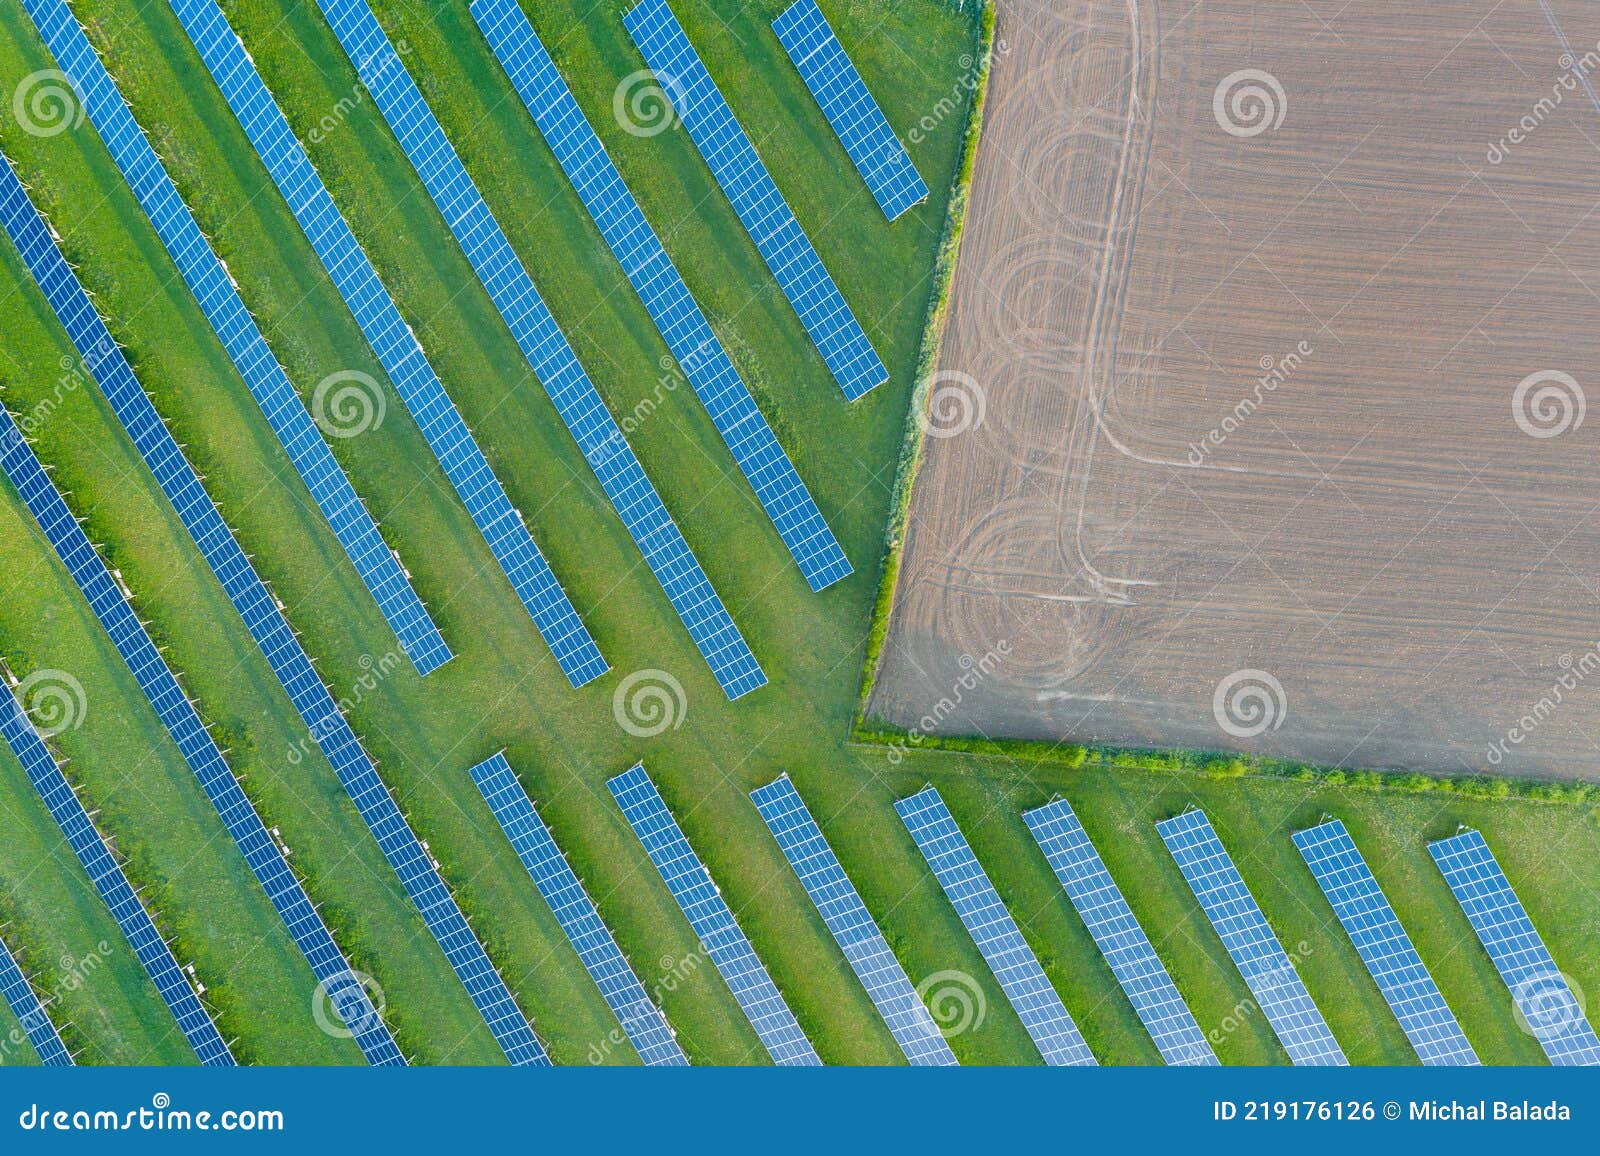 aerial view of solar power plant on green field. electric panels for producing clean ecologic energy. solar cell field. megawatt